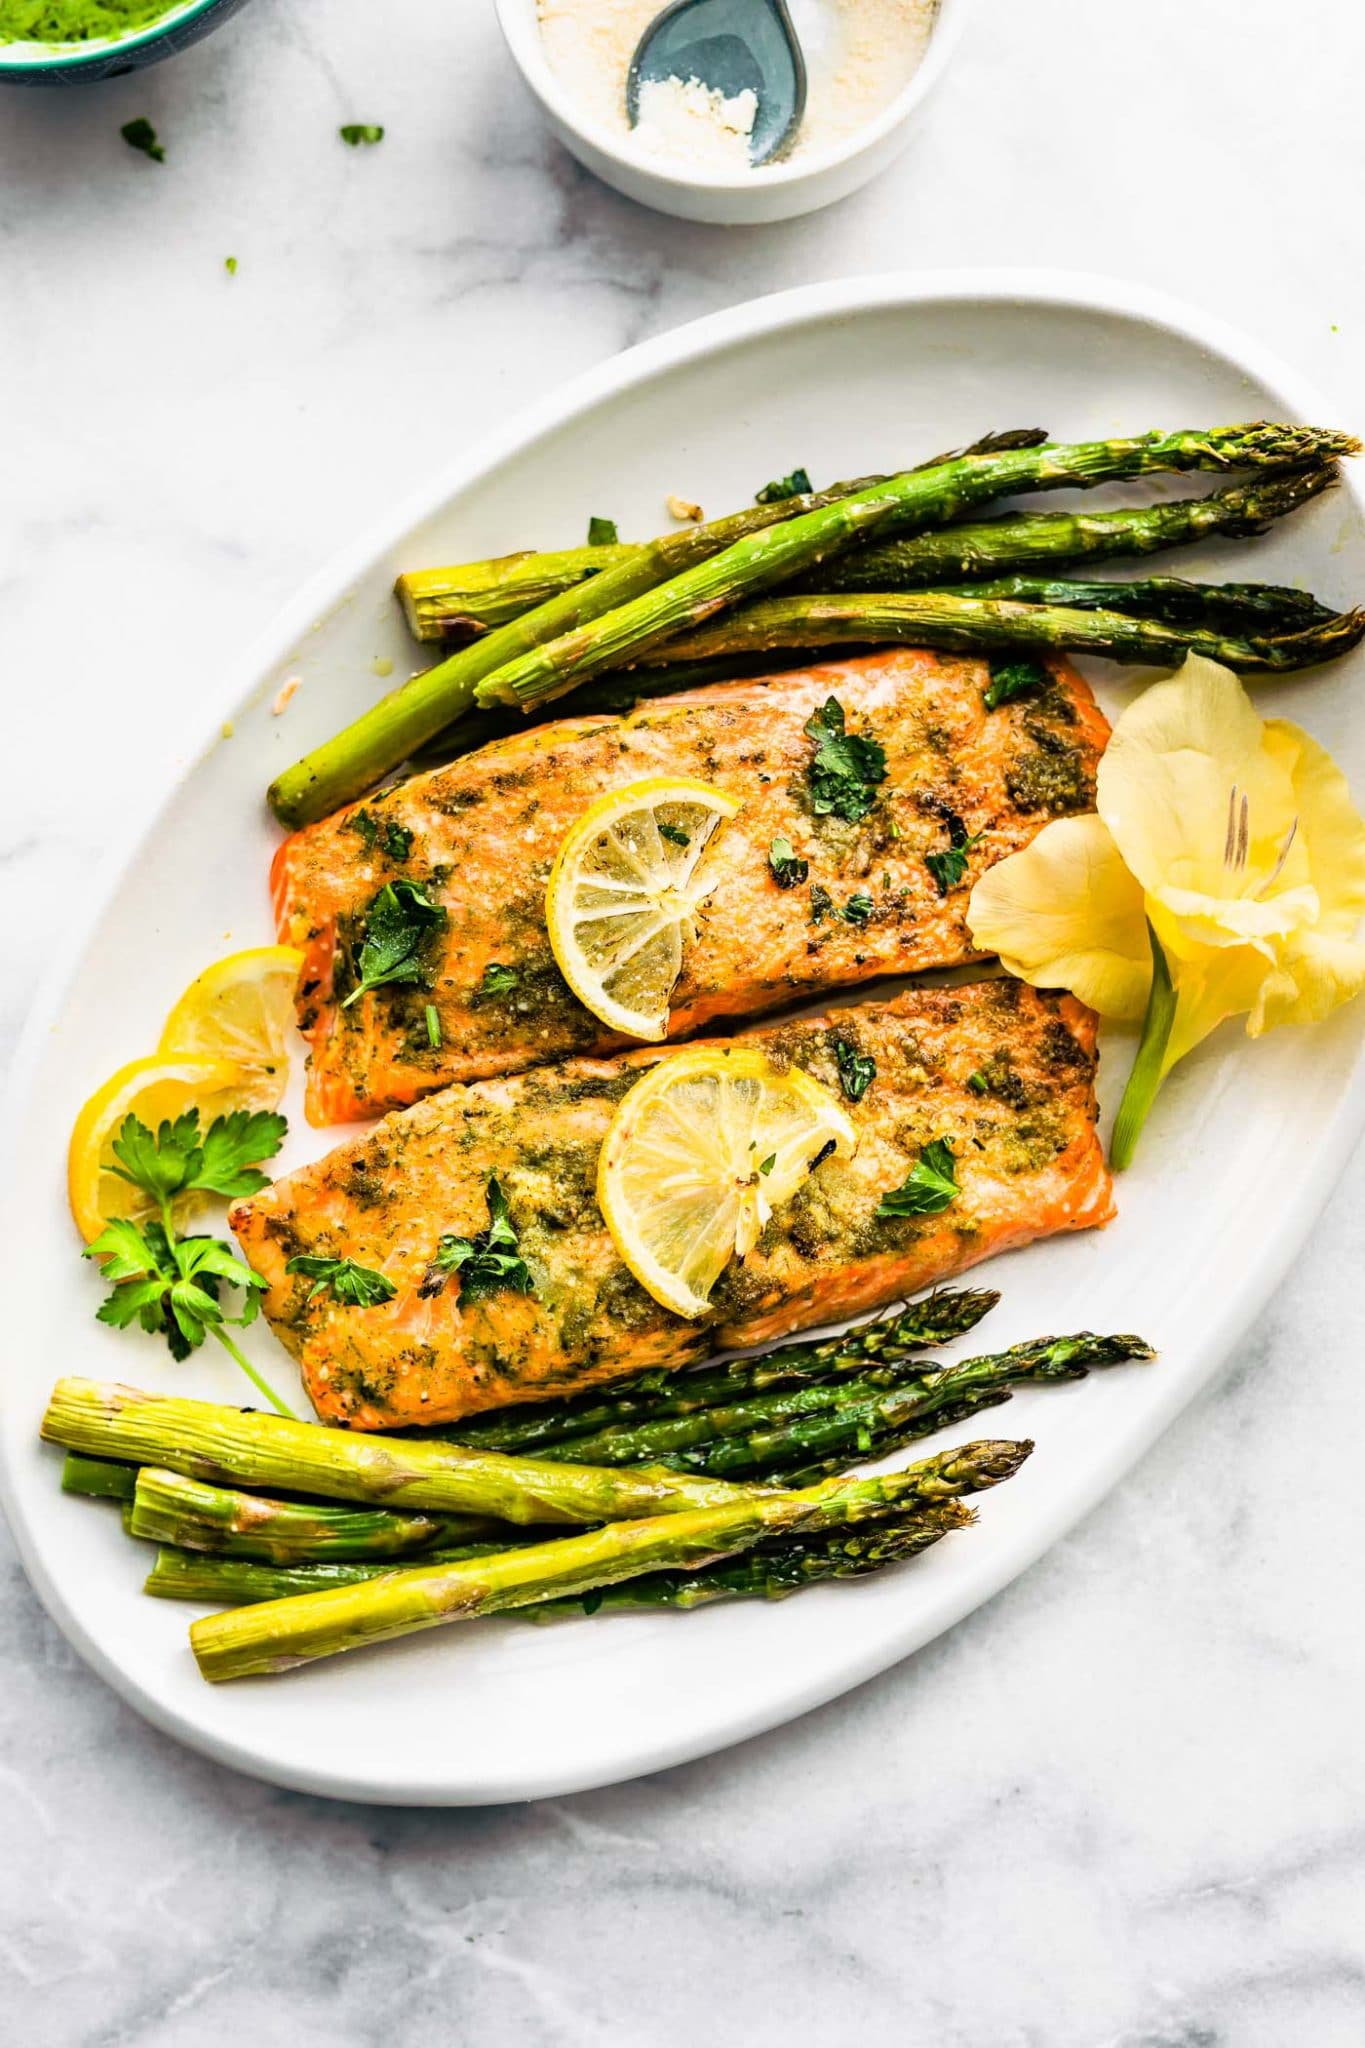 White platter with baked salmon filets and asparagus spears with lemon slices on side.